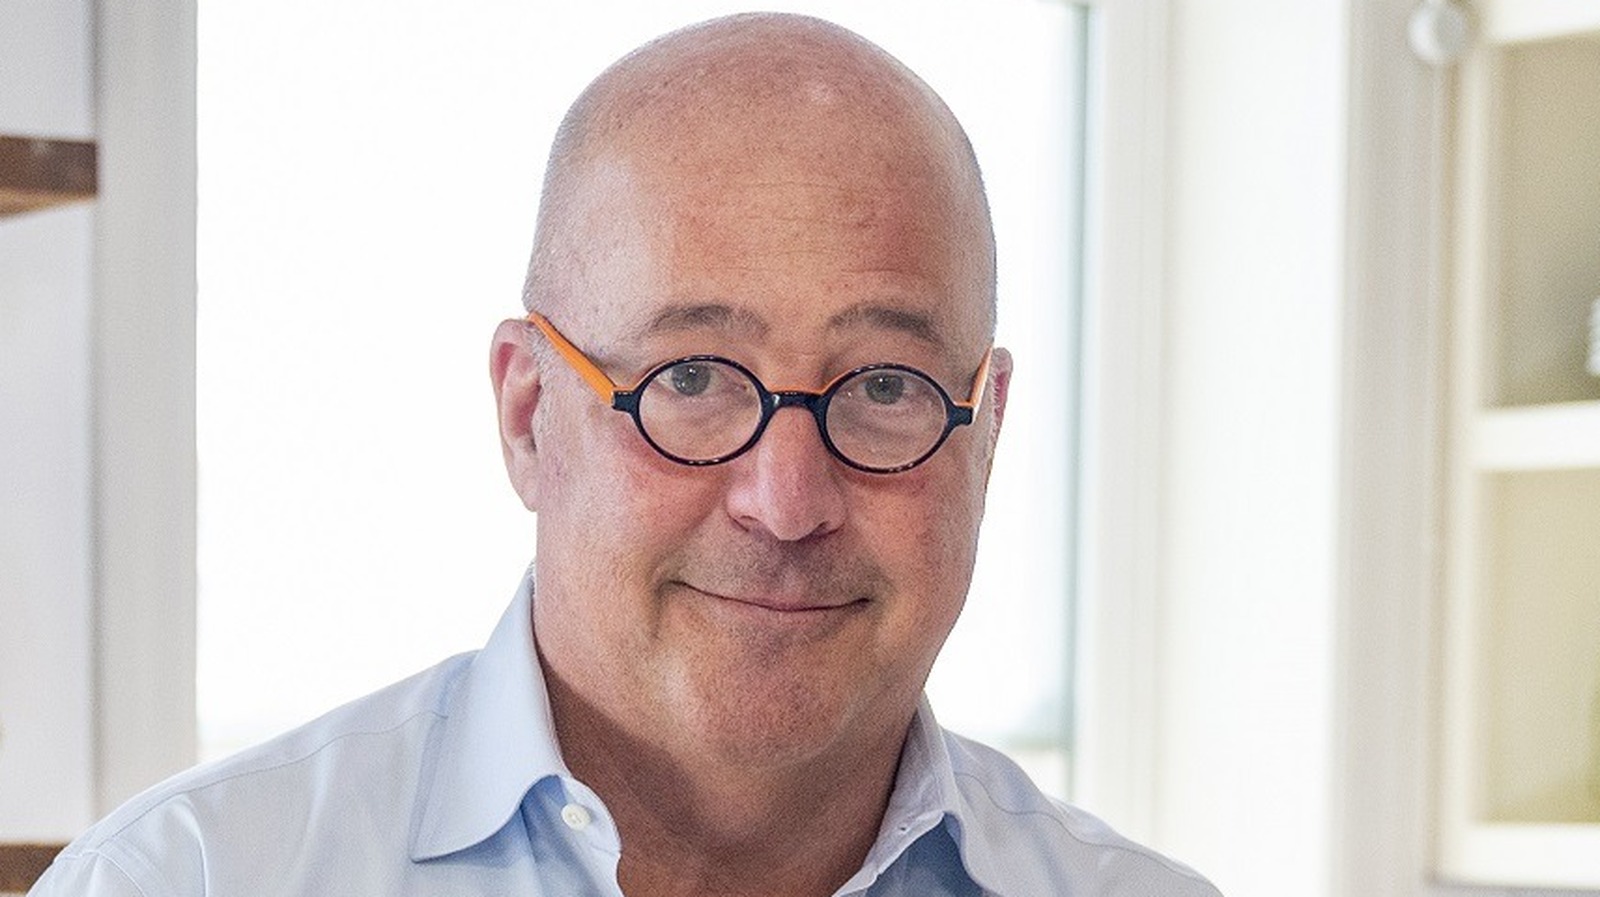 https://www.mashed.com/img/gallery/andrew-zimmern-dishes-on-family-dinner-and-bizarre-foods-exclusive-interview/l-intro-1626182537.jpg